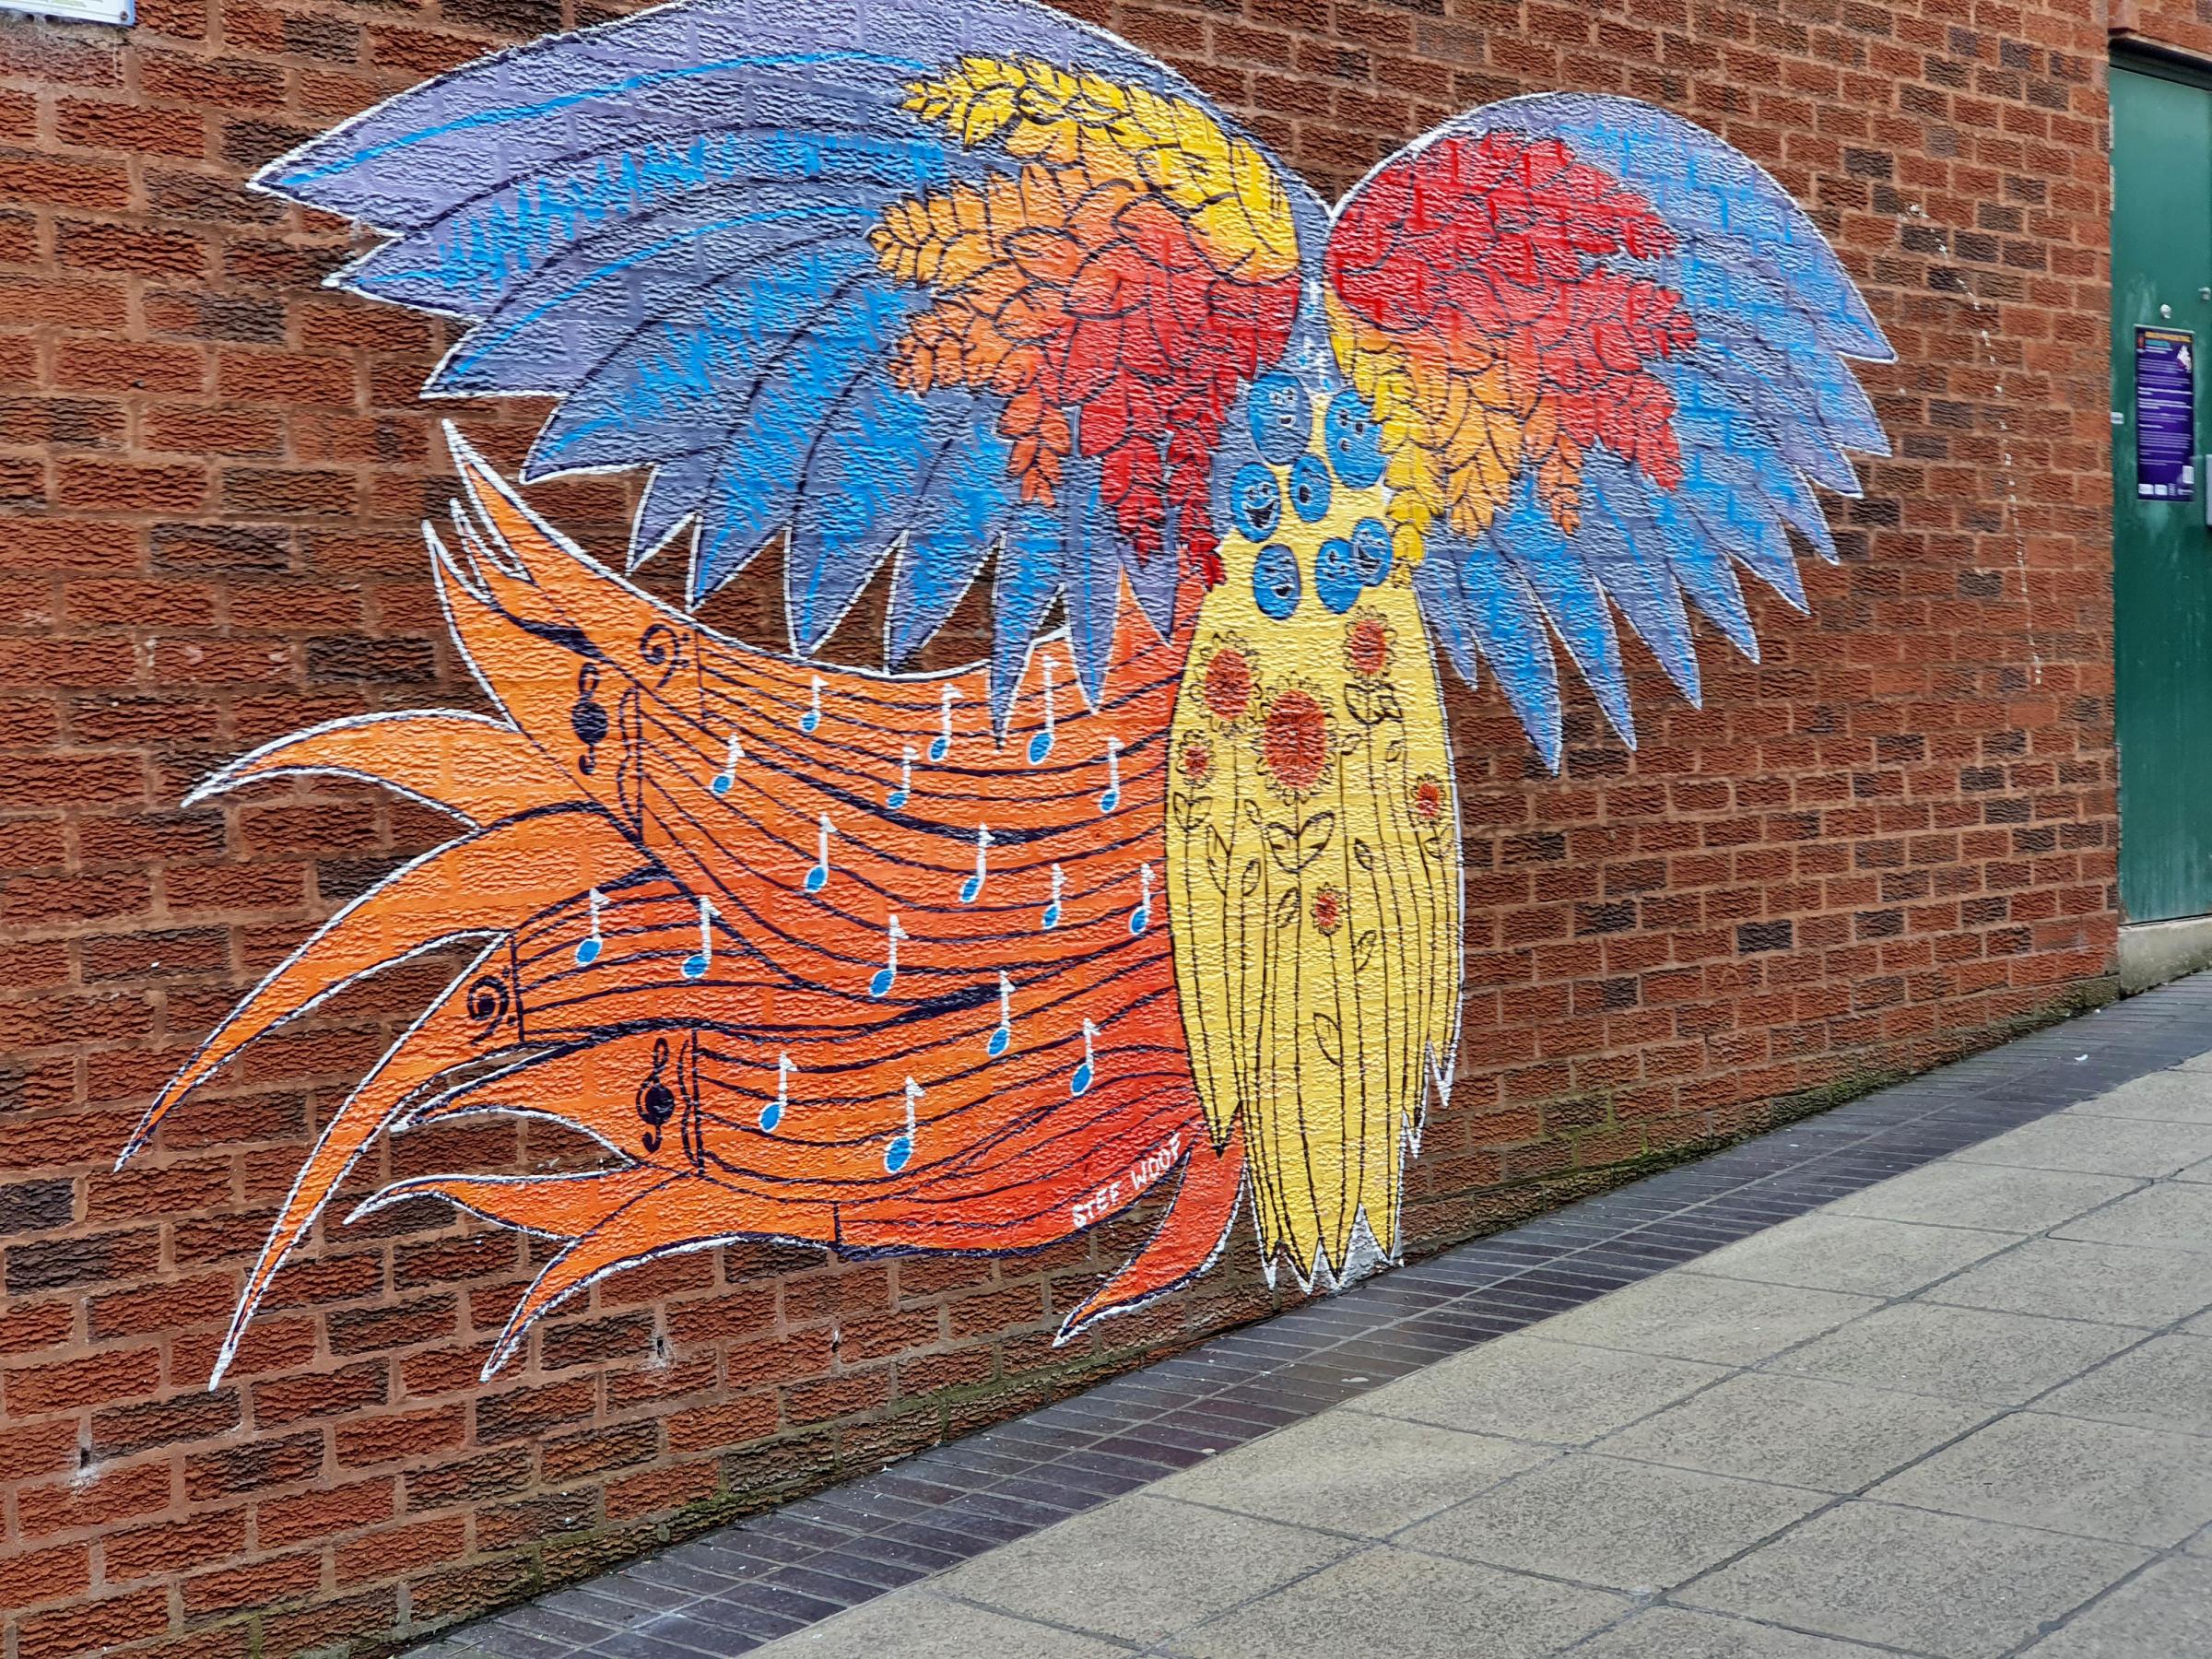 Murals to welcome the Papual New Guinea Rugby League World Cup team have appeared around Warrington